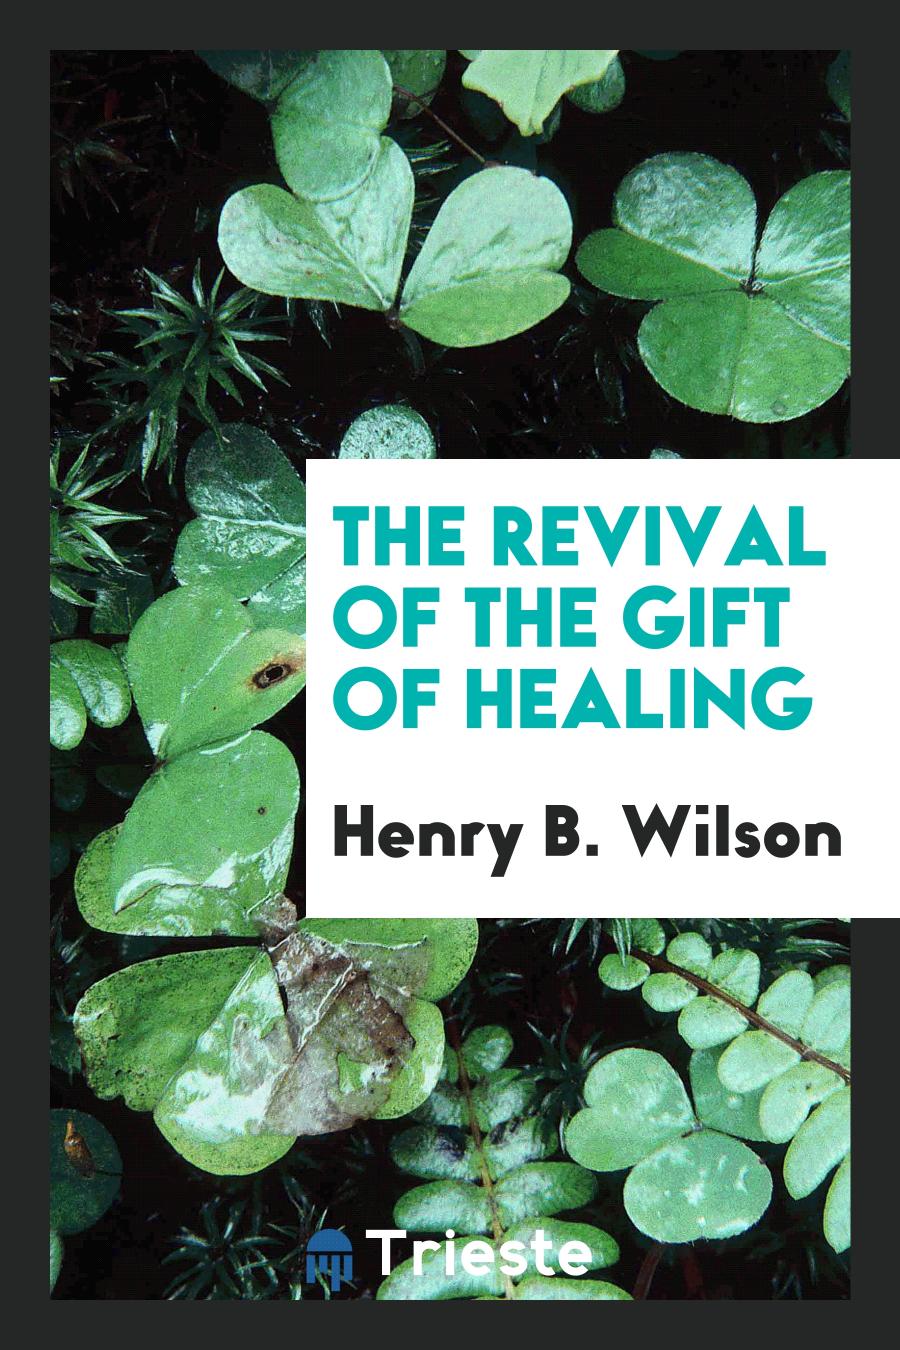 The Revival of the Gift of Healing